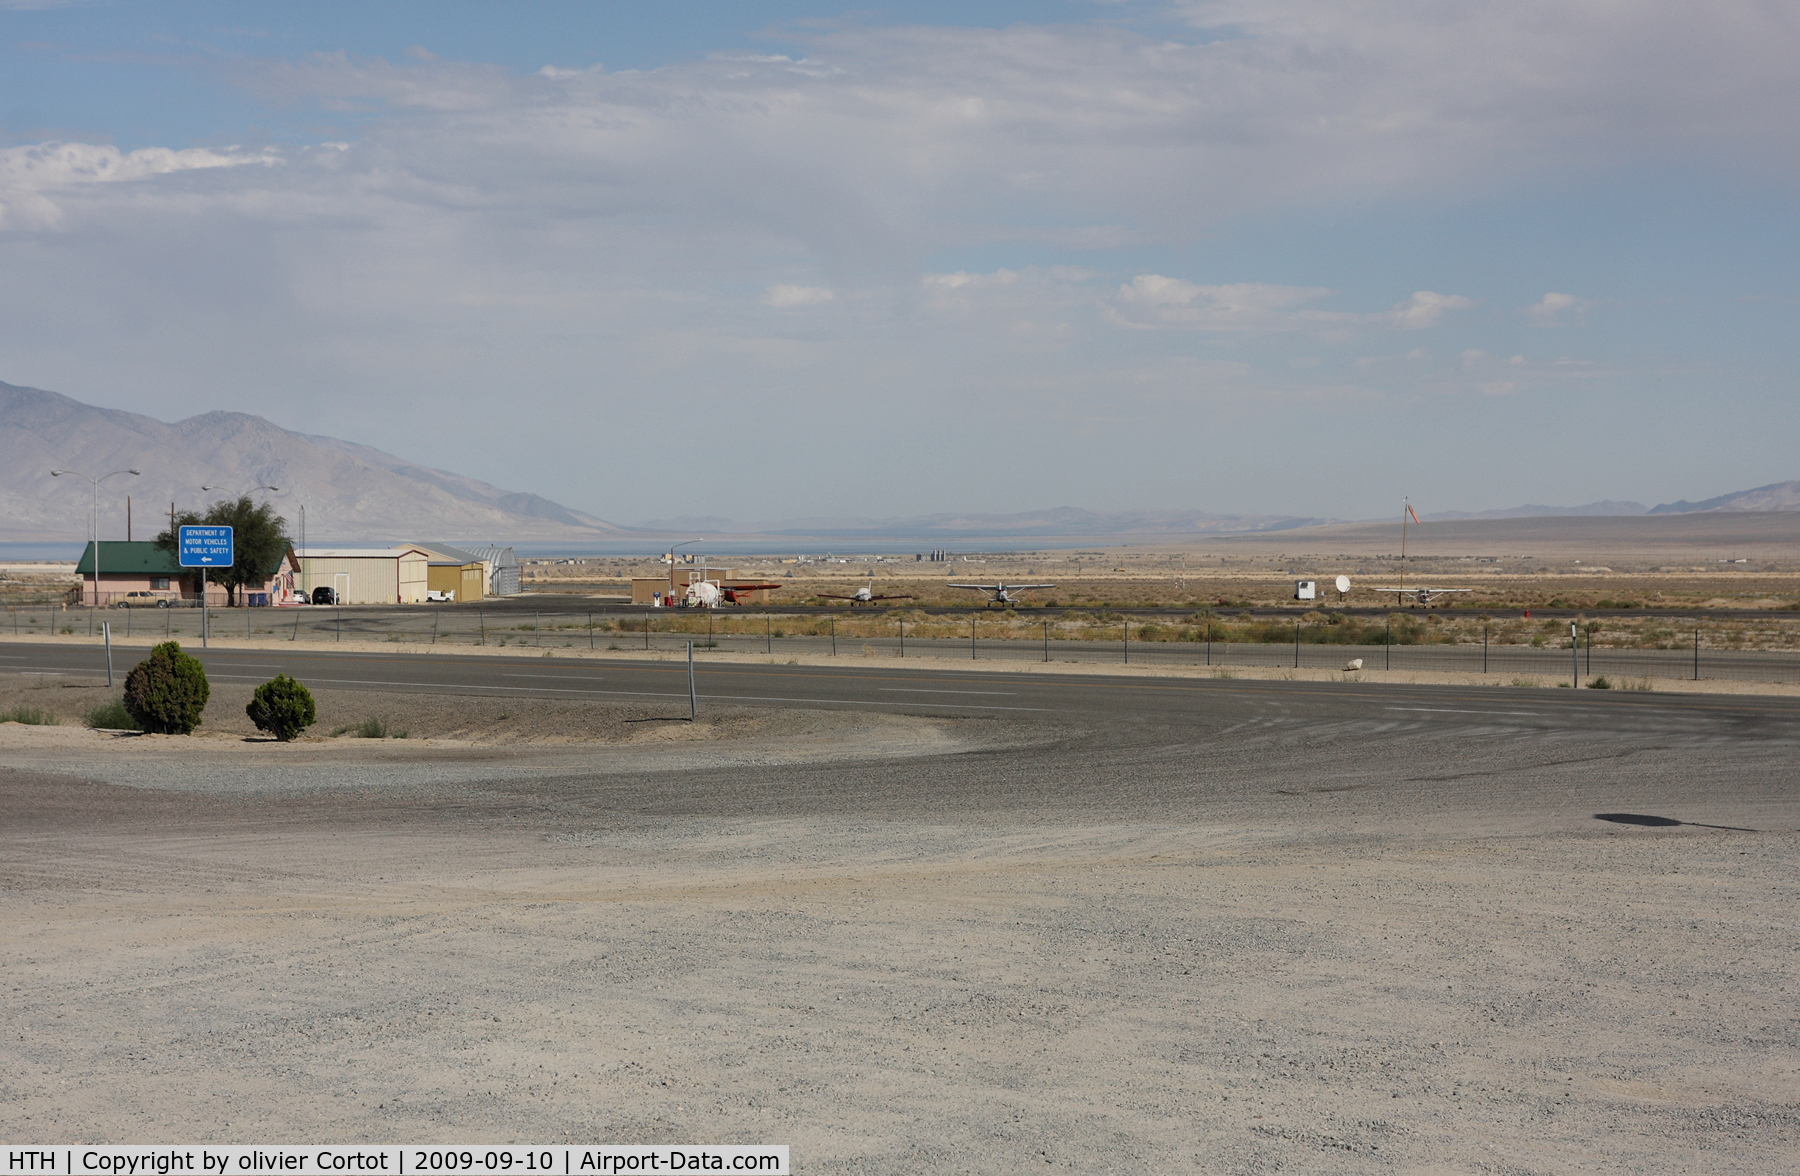 Hawthorne Industrial Airport (HTH) - Small airfield, but nice view !